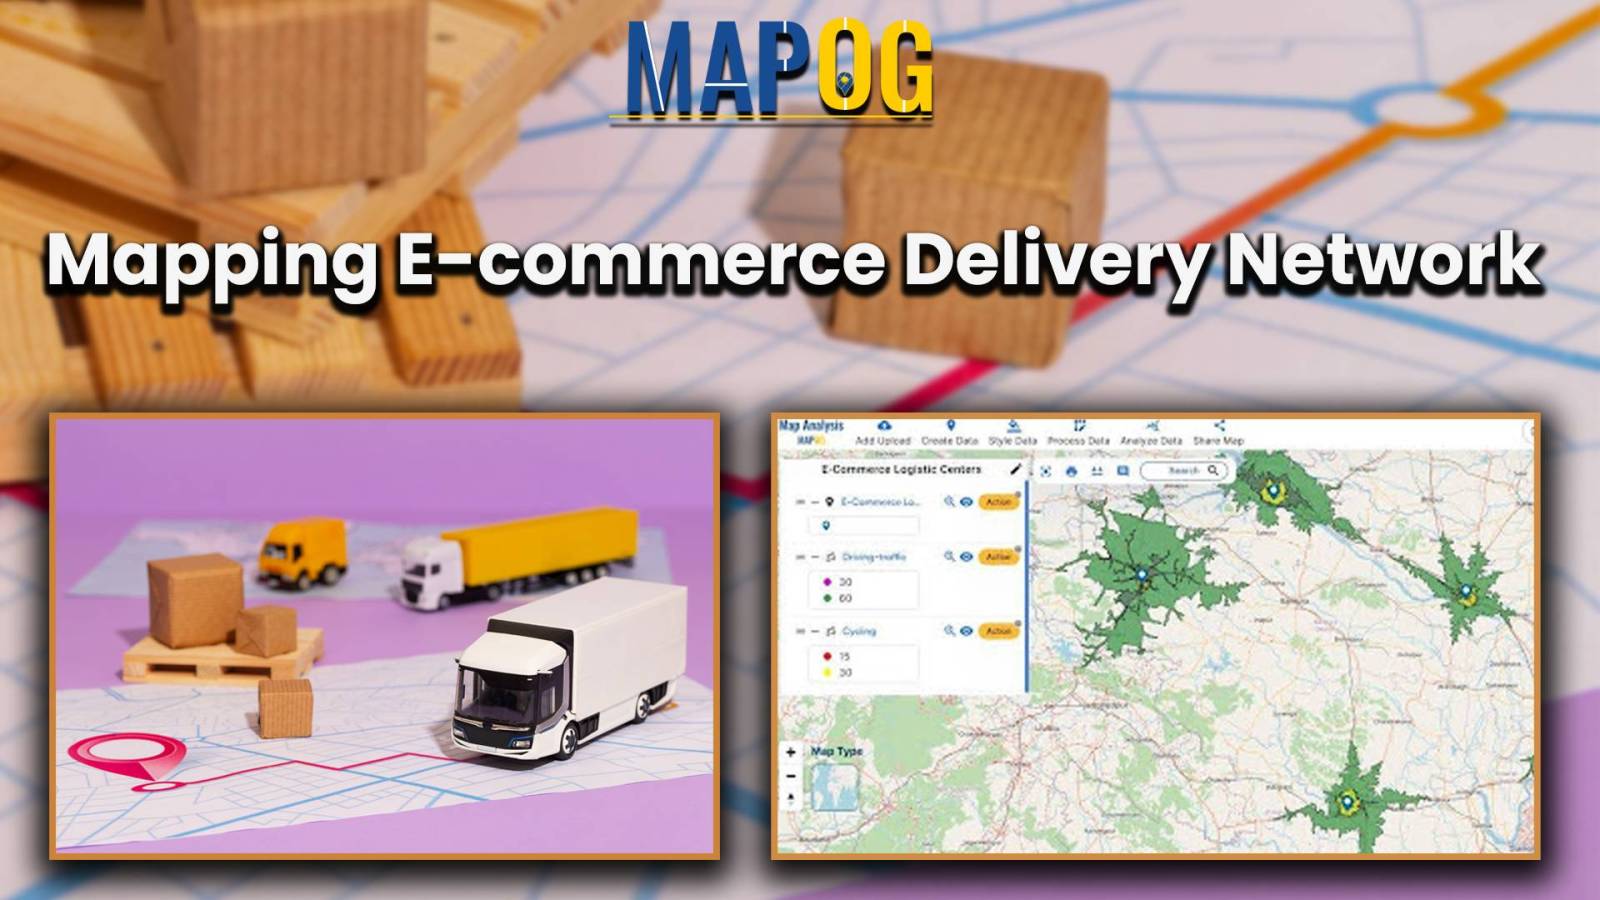 E- commerce delivery network